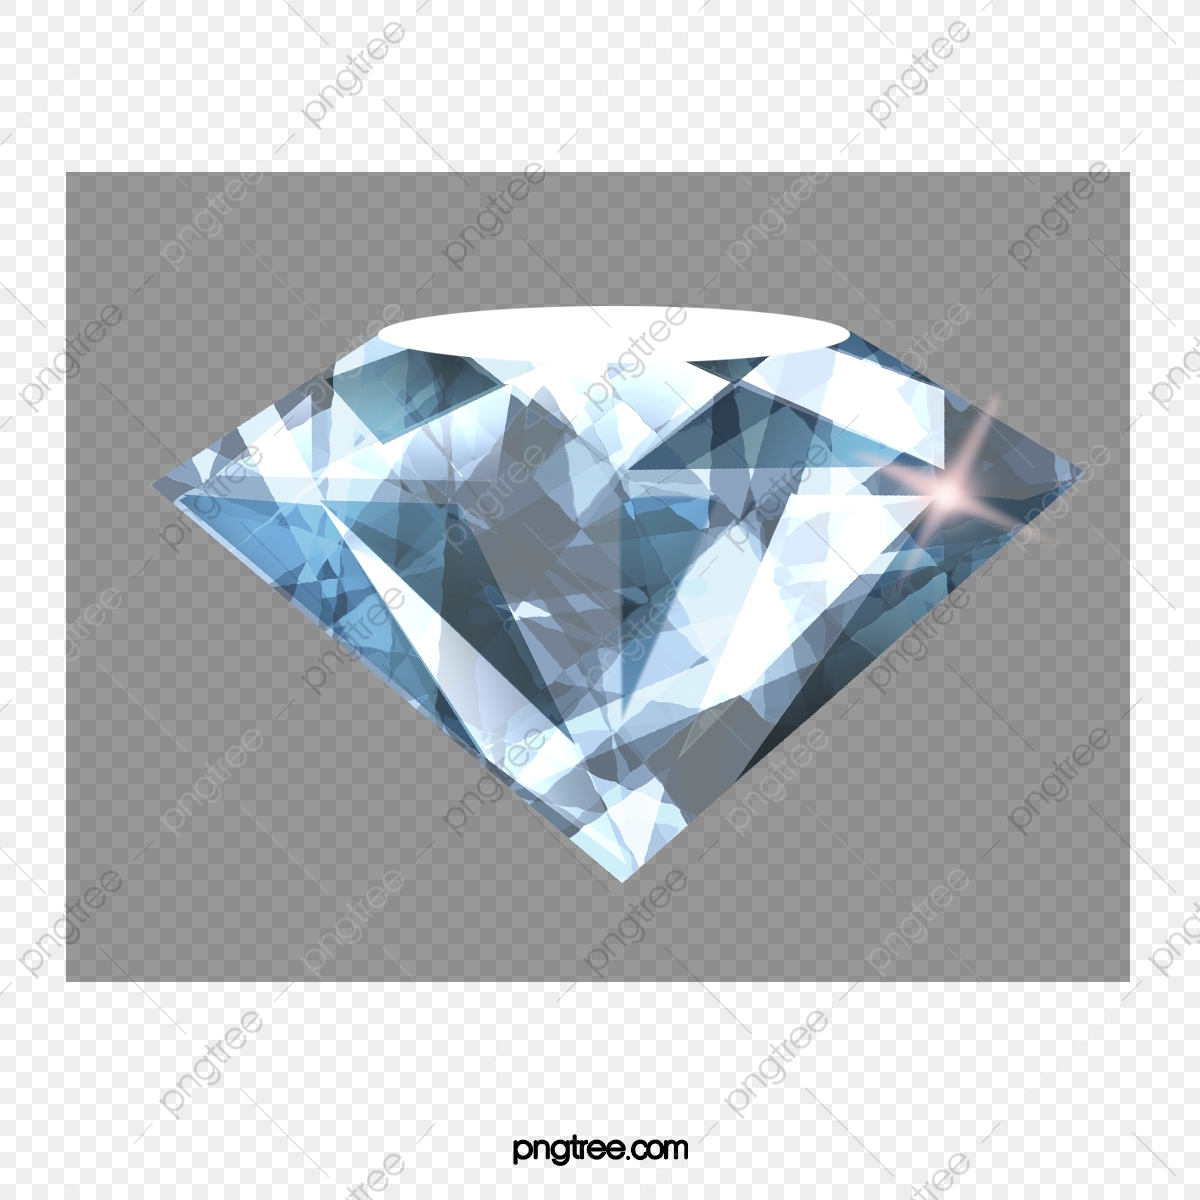 Diamond Vector Free Download at Vectorified.com | Collection of Diamond ...